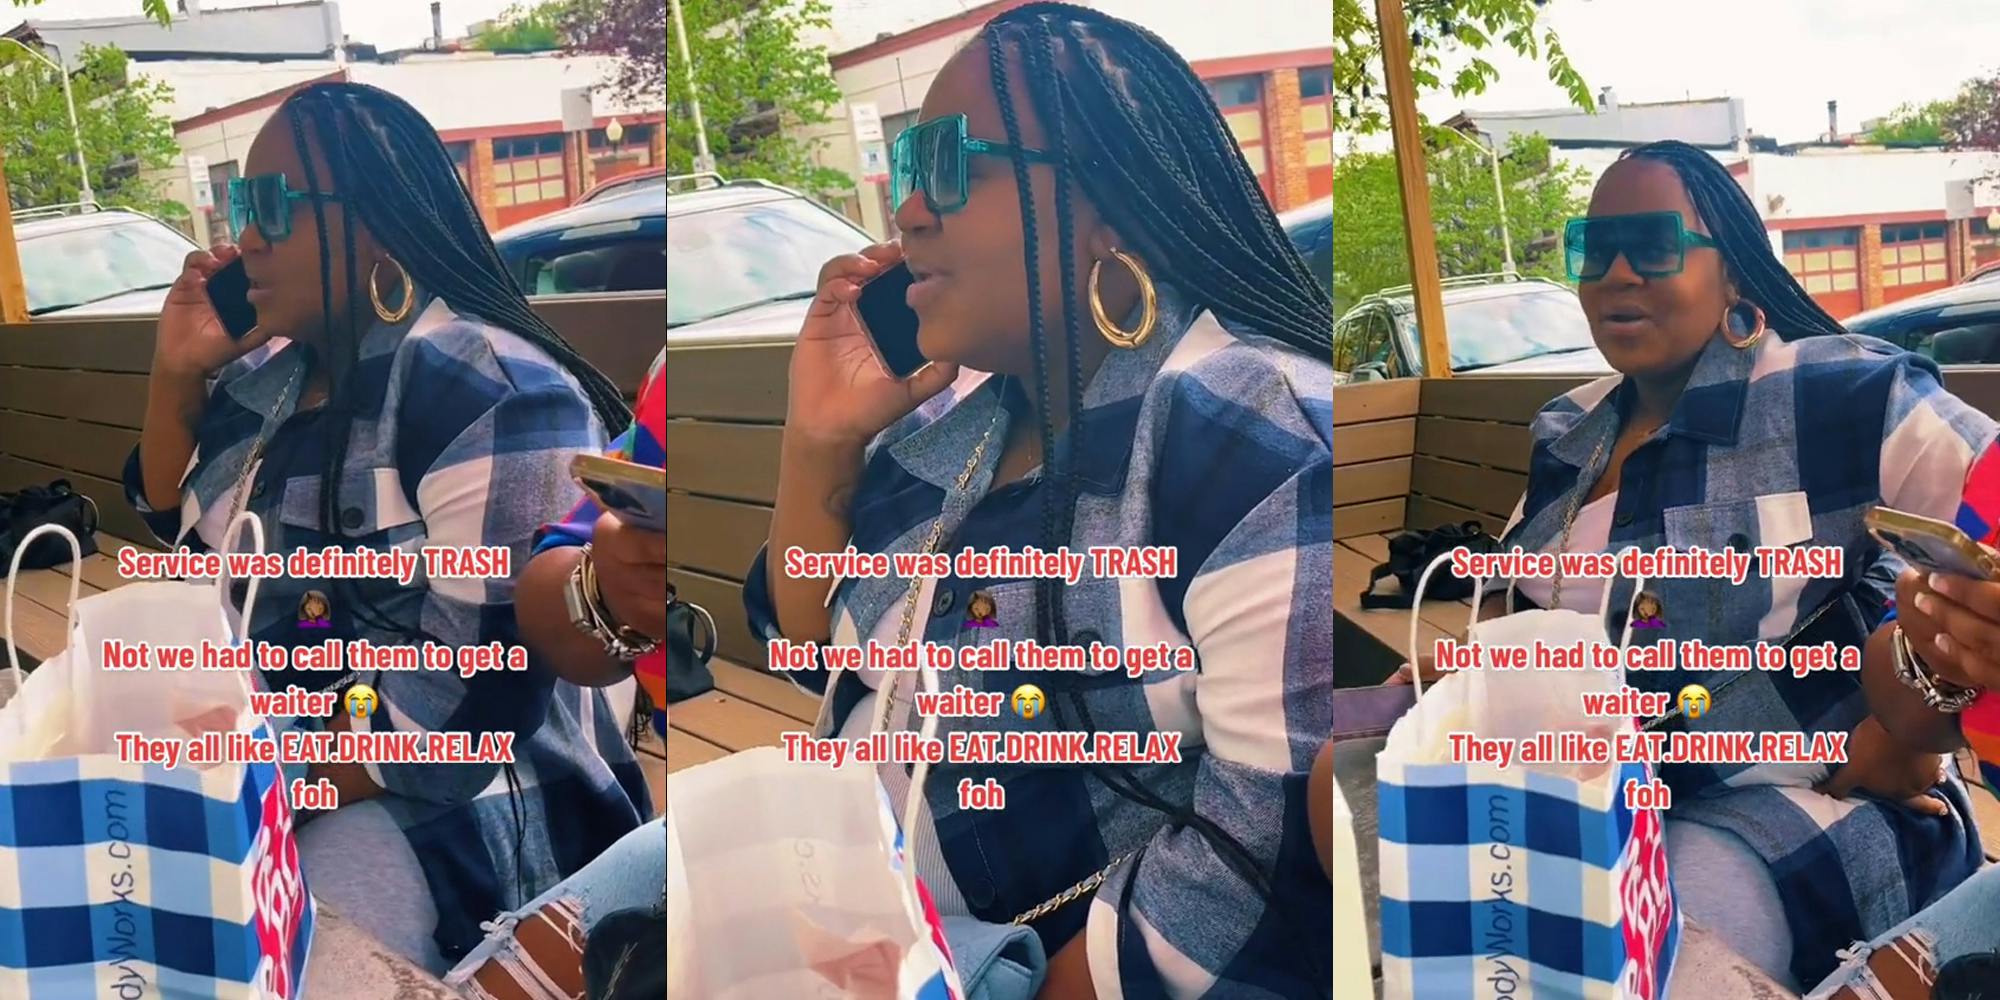 customers seated outside at restaurant on phone with caption "Service was definitely TRASH Not we had to call them to get a waiter They all like EAT DRINK RELAX foh" (l) customers seated outside at restaurant on phone with caption "Service was definitely TRASH Not we had to call them to get a waiter They all like EAT DRINK RELAX foh" (c) customers seated outside at restaurant on phone with caption "Service was definitely TRASH Not we had to call them to get a waiter They all like EAT DRINK RELAX foh" (r)